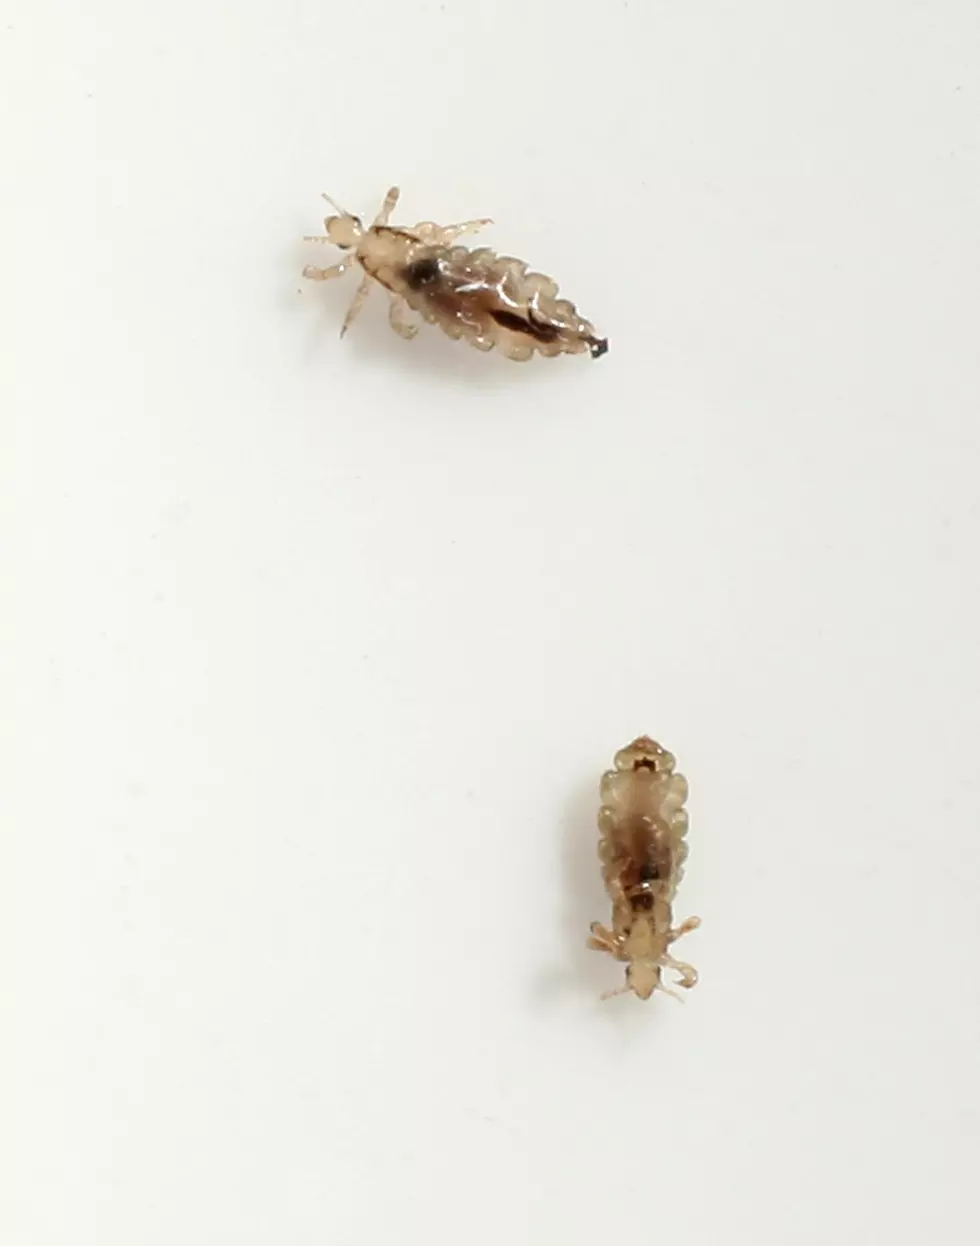 Head Lice Season Is Upon Us! Here’s Some Ways To Avoid The Itch